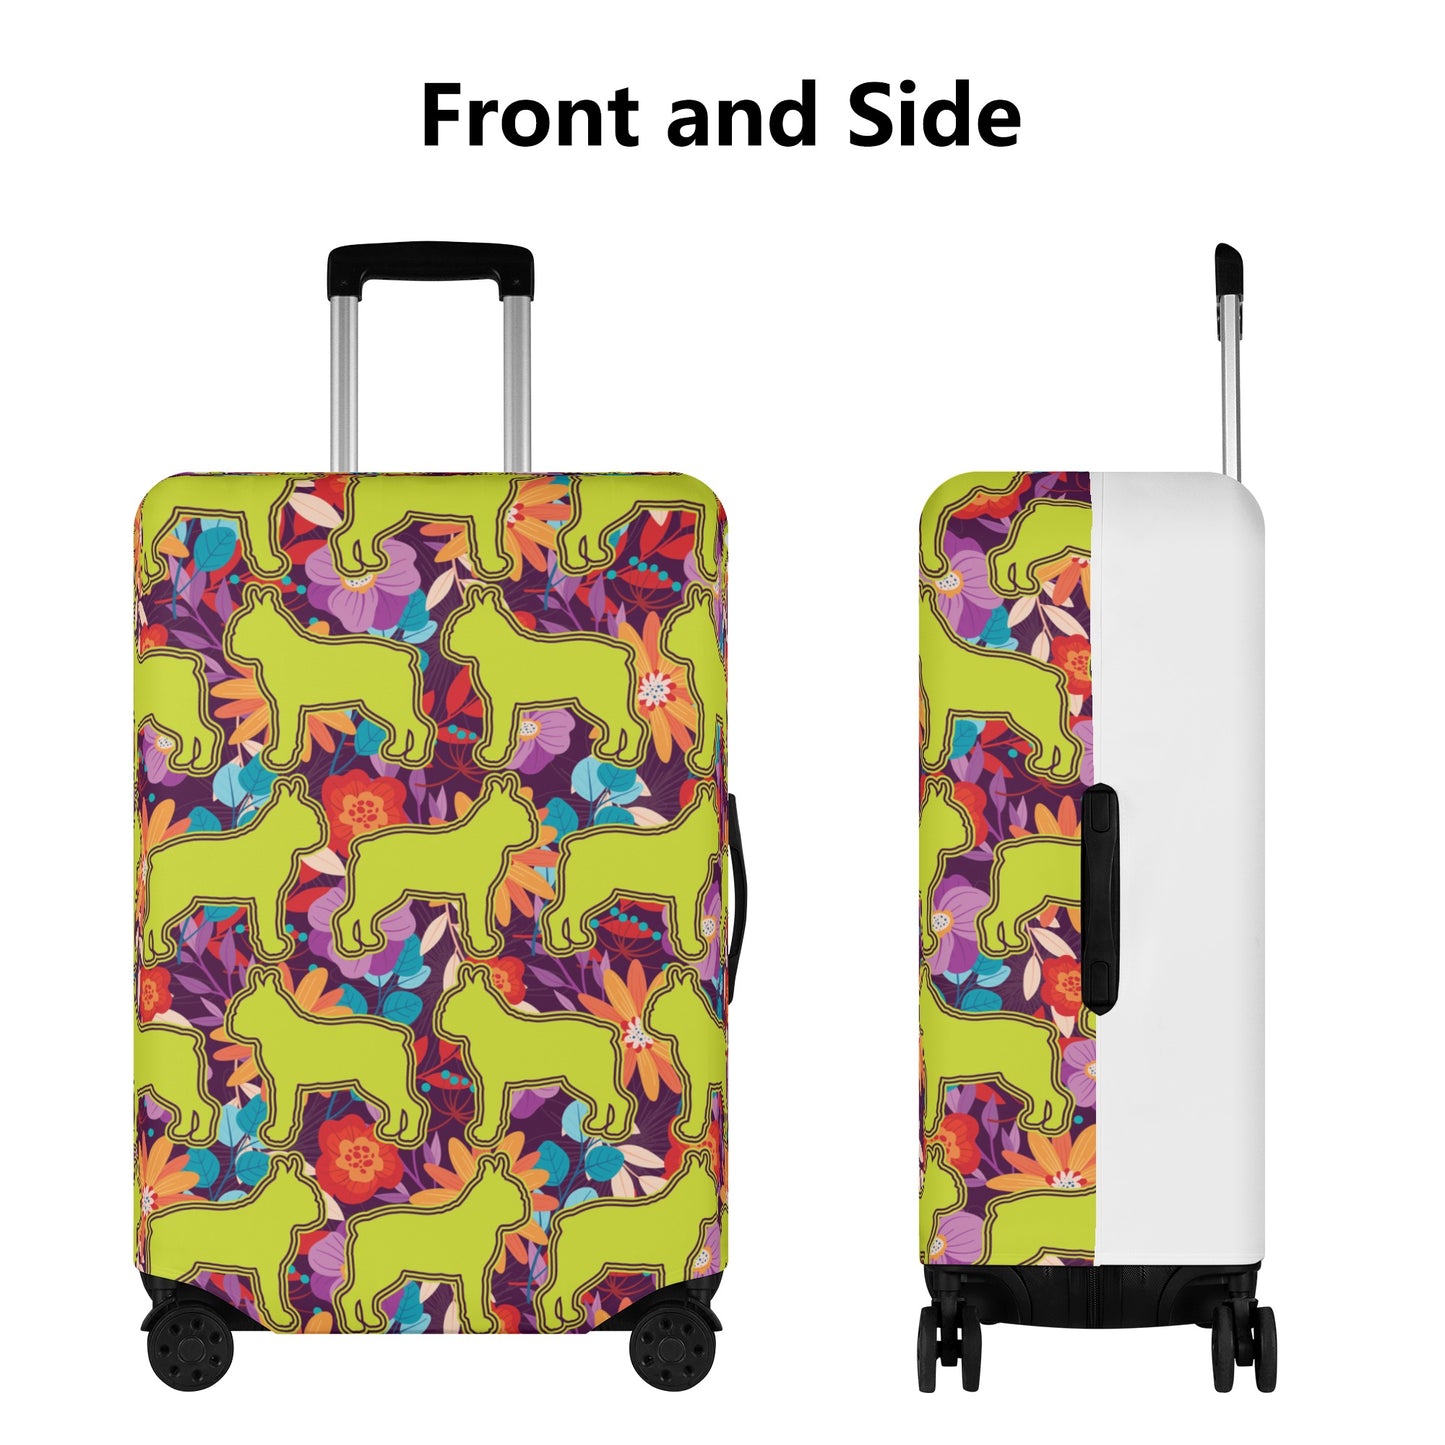 Lexi - Luggage Cover for Boston Terrier lovers